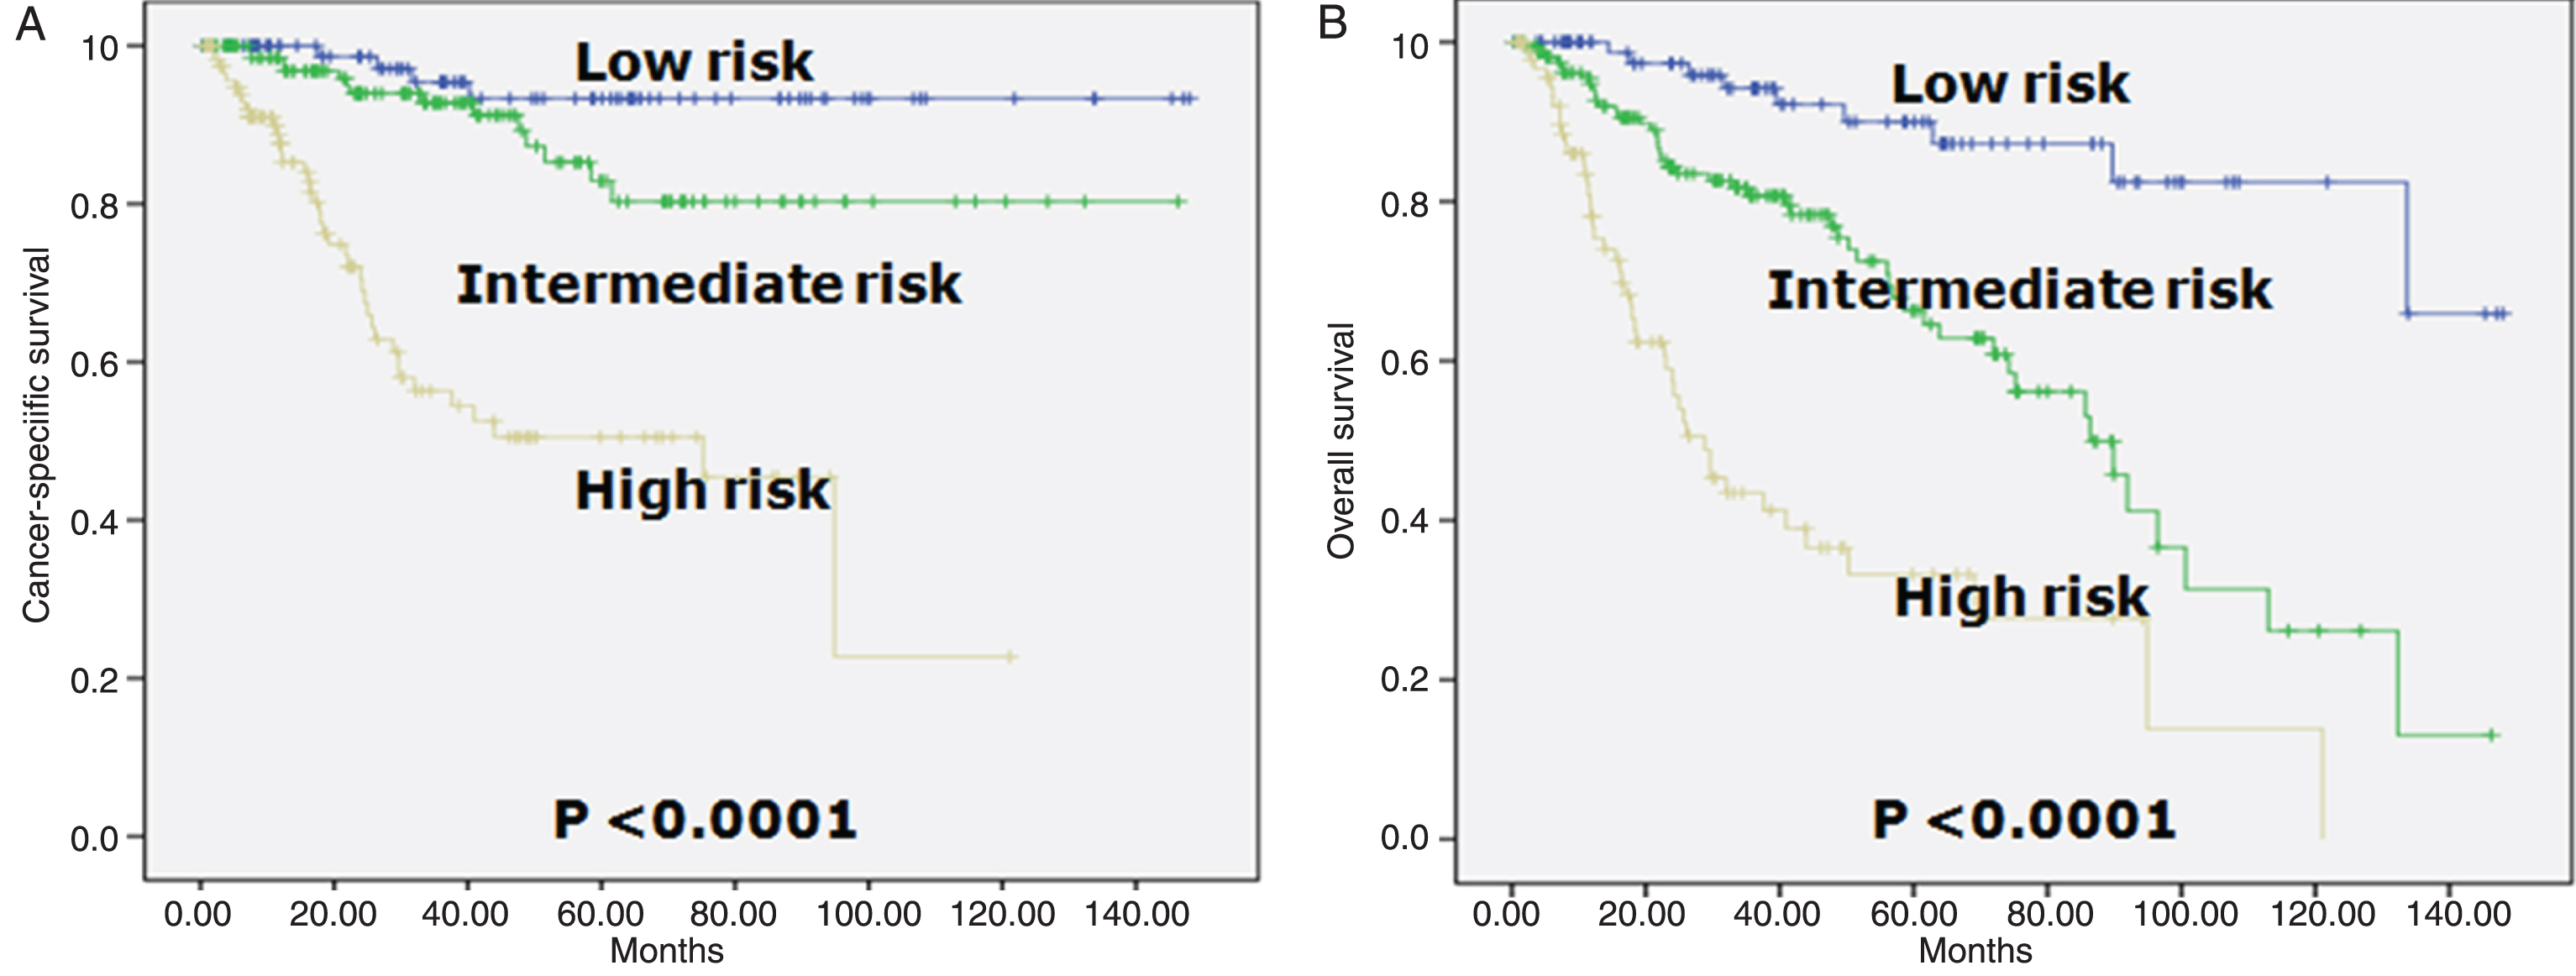 Kaplan-Meier survival curves in three risk group in patients who underwent radical cystectomy according to the prognostic classification. A. Cancer-specific survival (log-rank test for trend, p = 0.0010). Risk categories were determined by adding up the points for each of the following risk factors: ≥65 years (2 points), ≥pT3 (4 points), ≥pN1 (3 points), positive margin (2 pints), and variant forms except squamous differentiation (4 points). The prognostic index was categorized in three groups: low- (0 to 1 point), intermediate- (2 to 5 points), and high-risk (6 or higher points). B. Overall survival (log-rank test for trend, p = 0.0100). Risk categories were determined by adding up the points for each of the following risk factors: ≥65 years (4 points), ≥pT3 (4 points), ≥pN1 (3 points), and variant forms except squamous differentiation (3 points). The prognostic index was categorized in three groups: low- (0 to 2 points), intermediate- (3 to 7 points), and high-risk (8 or higher points).